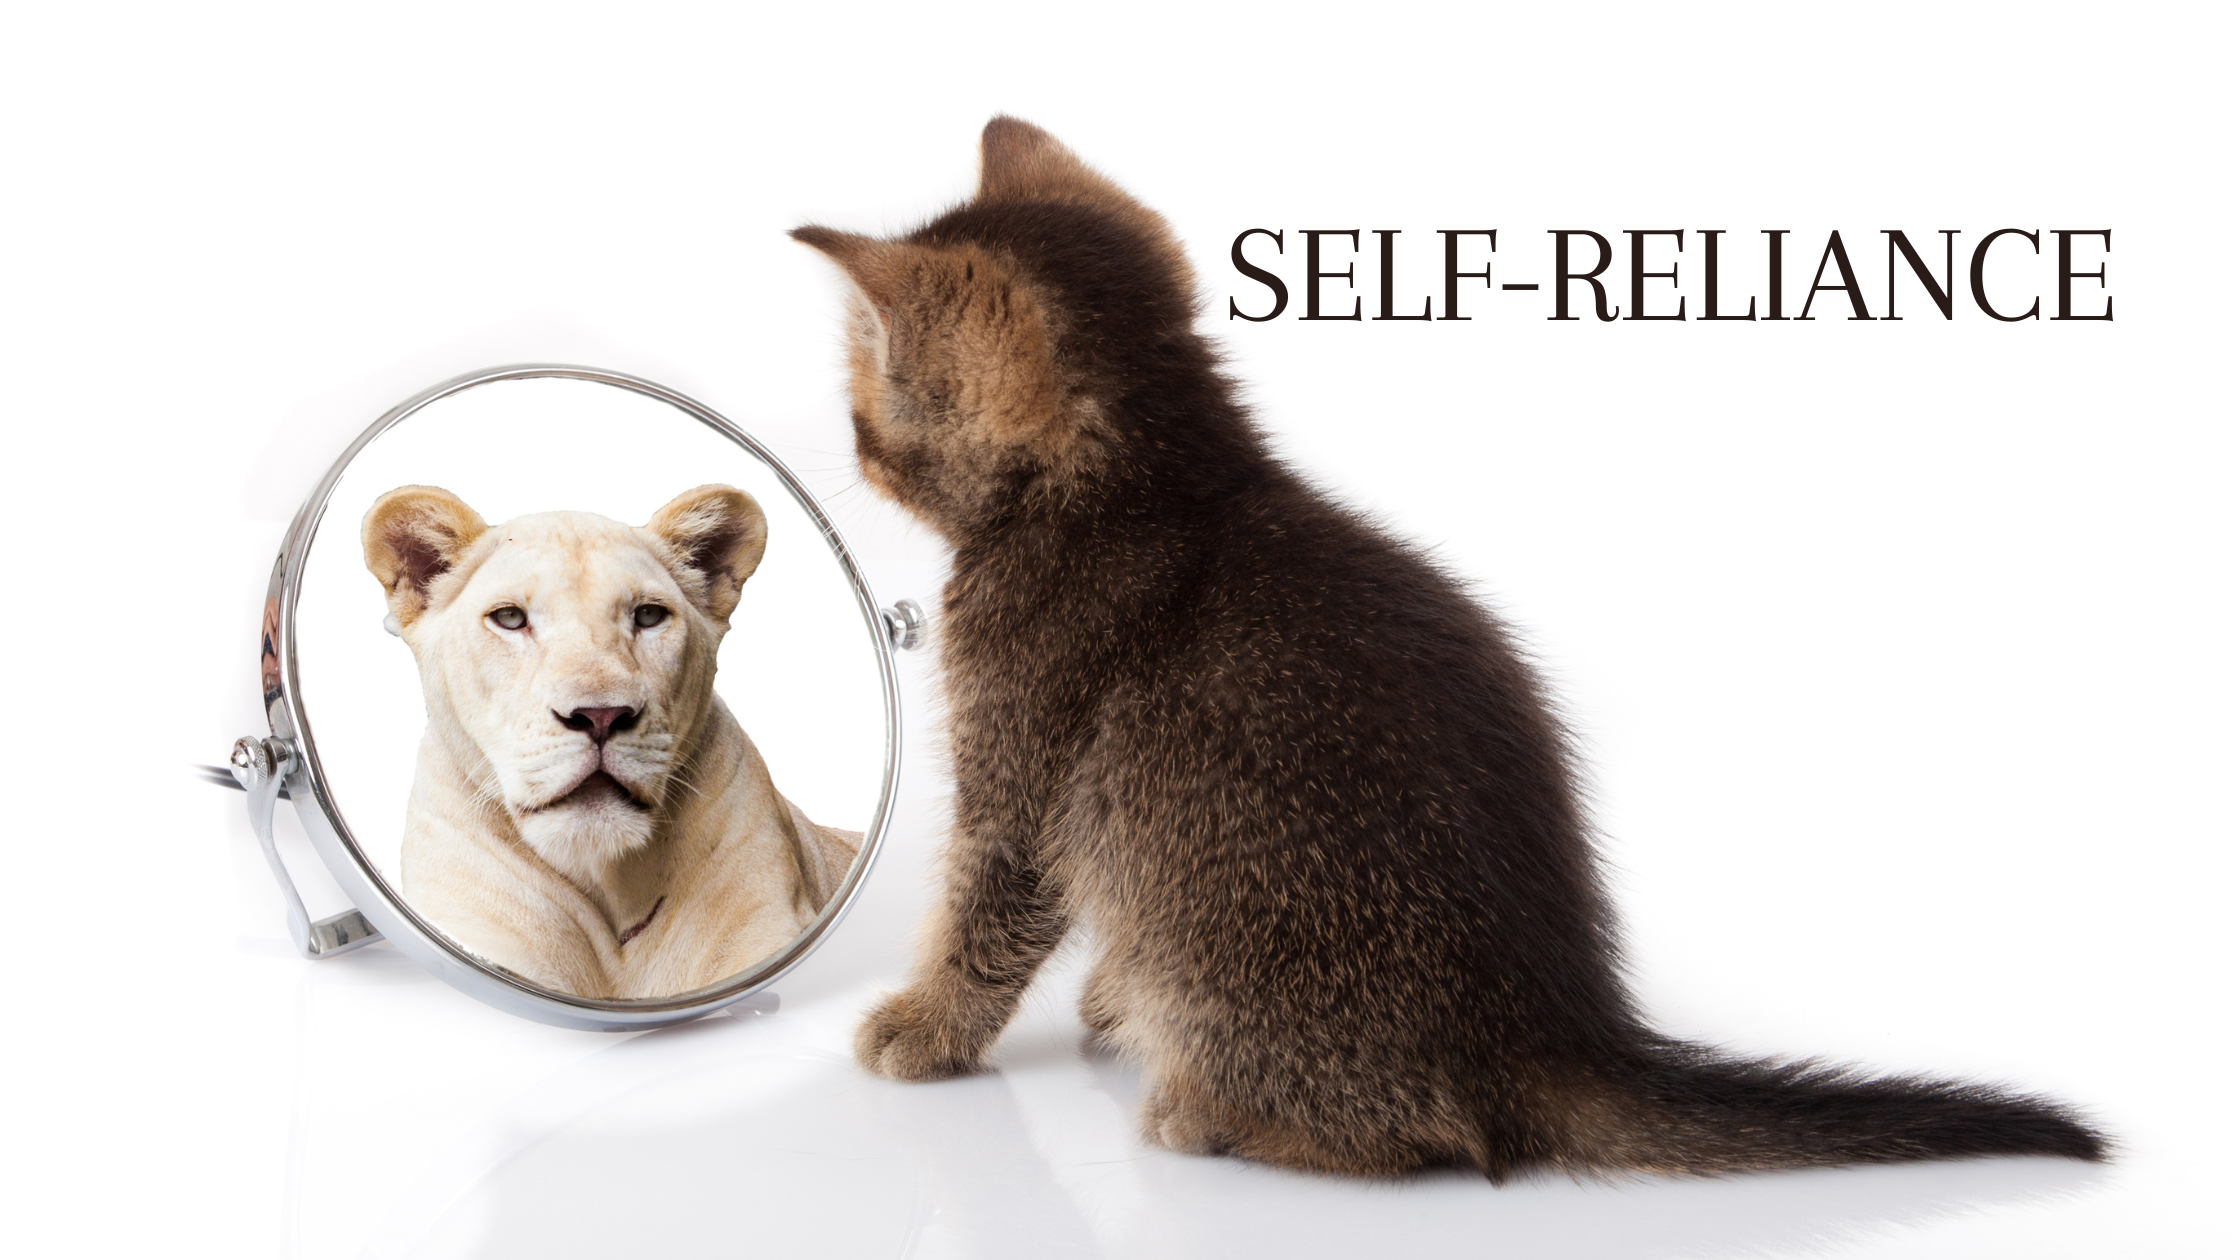 What Is Pride? Self-reliance